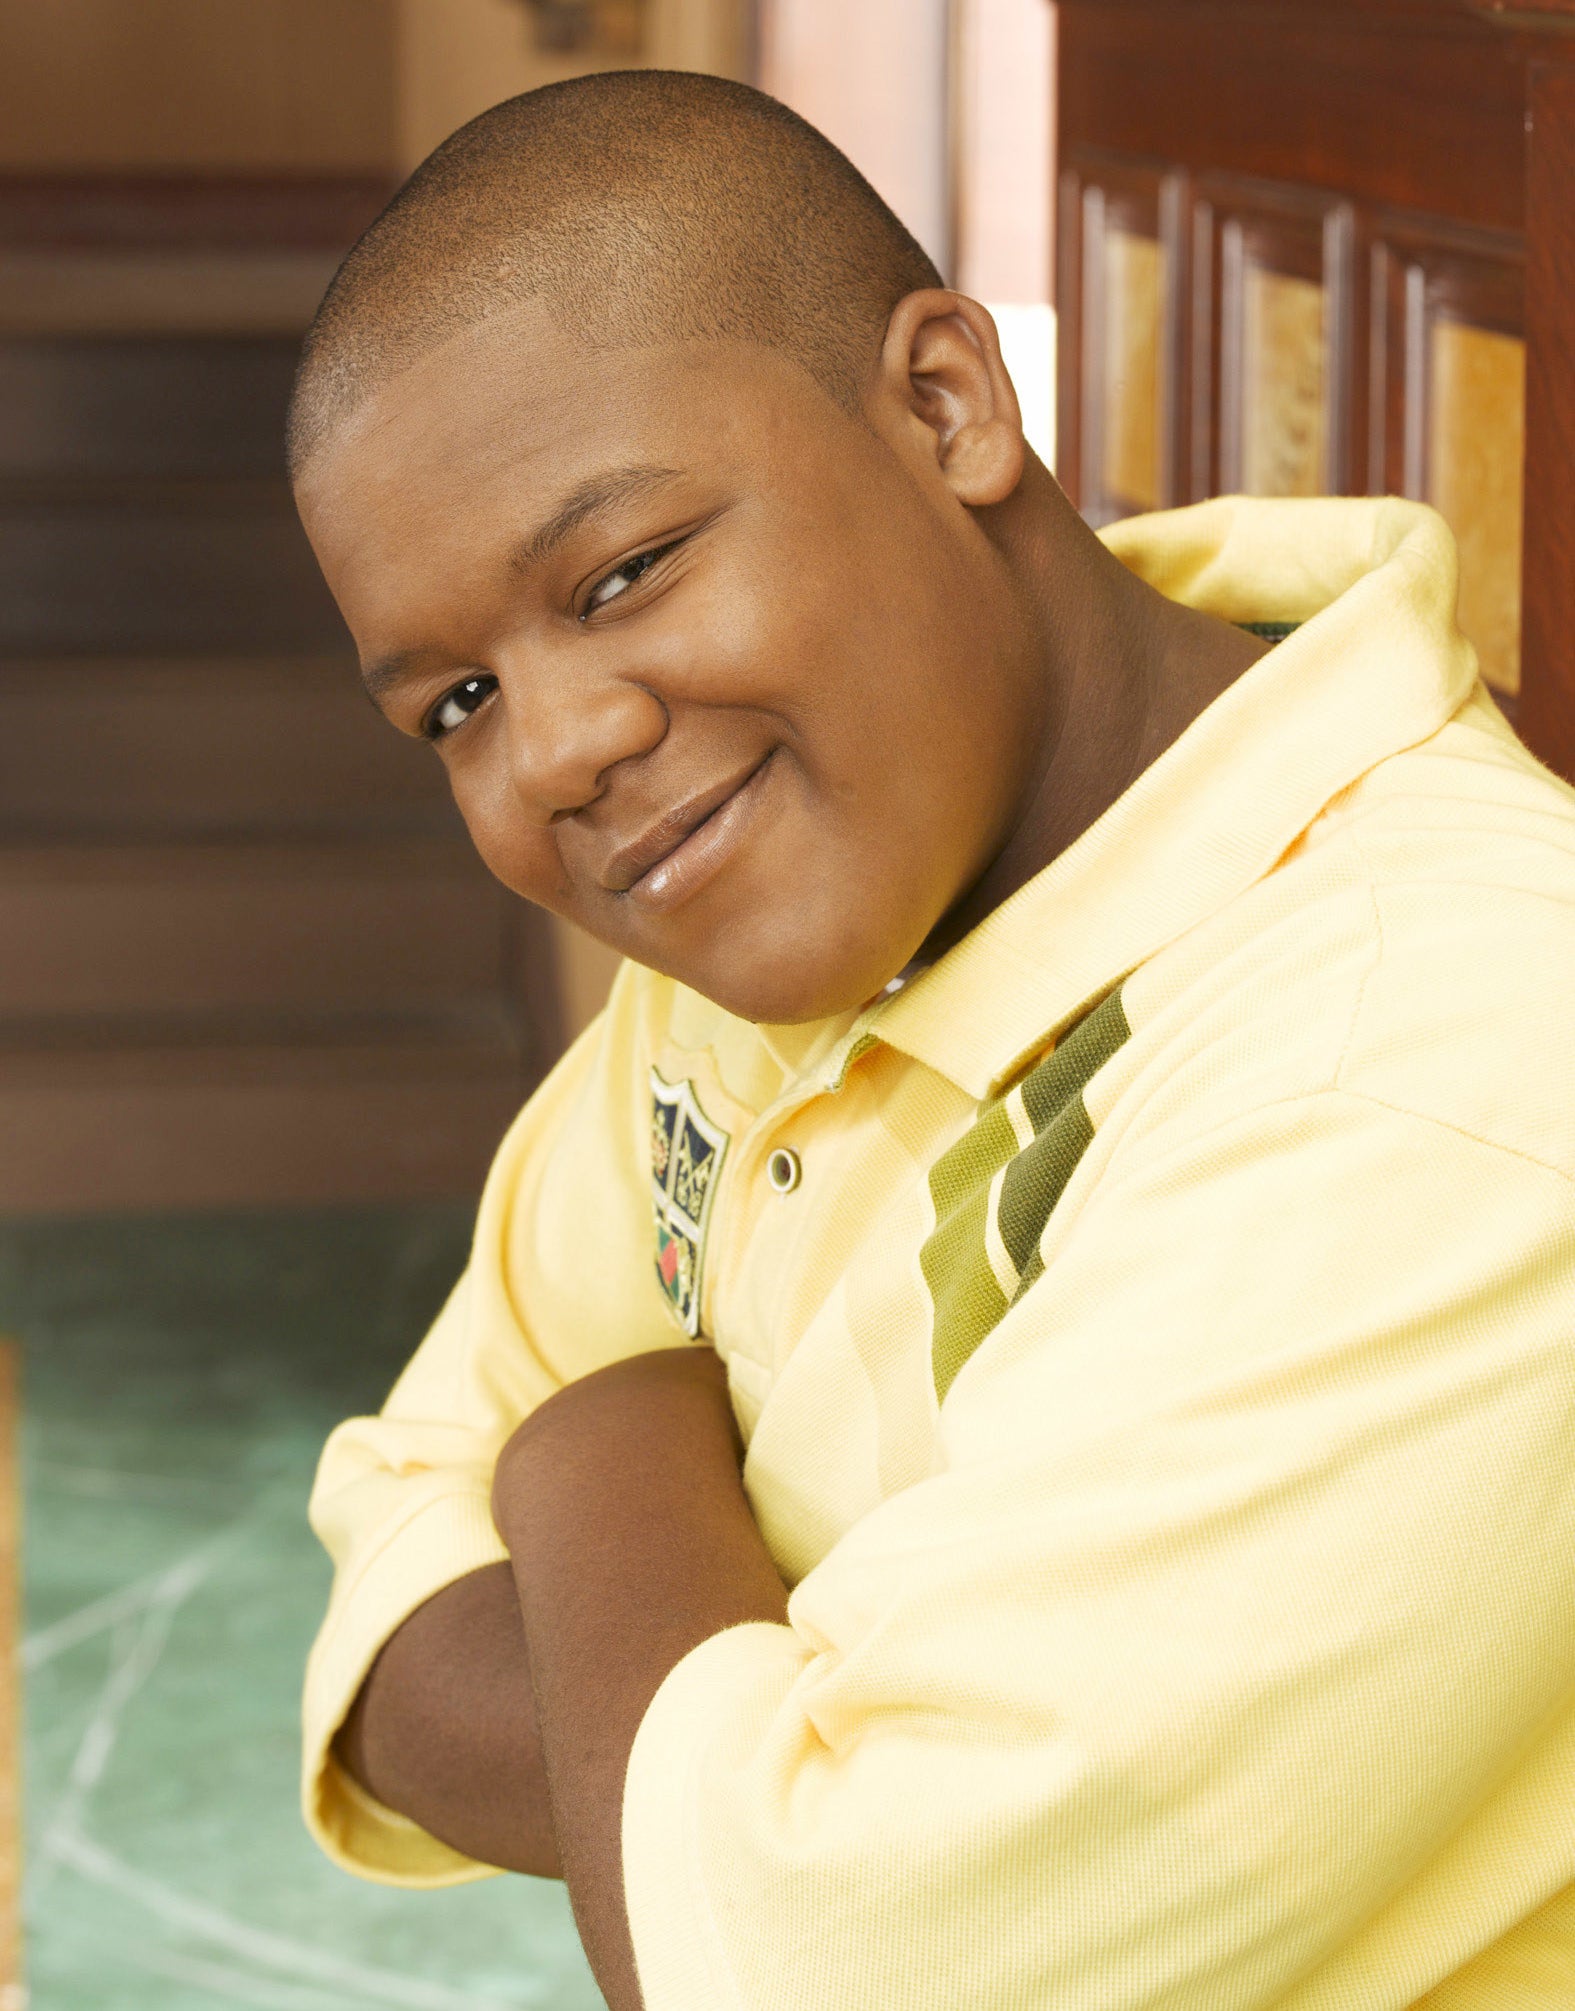 Kyle Massey in Cory in the House